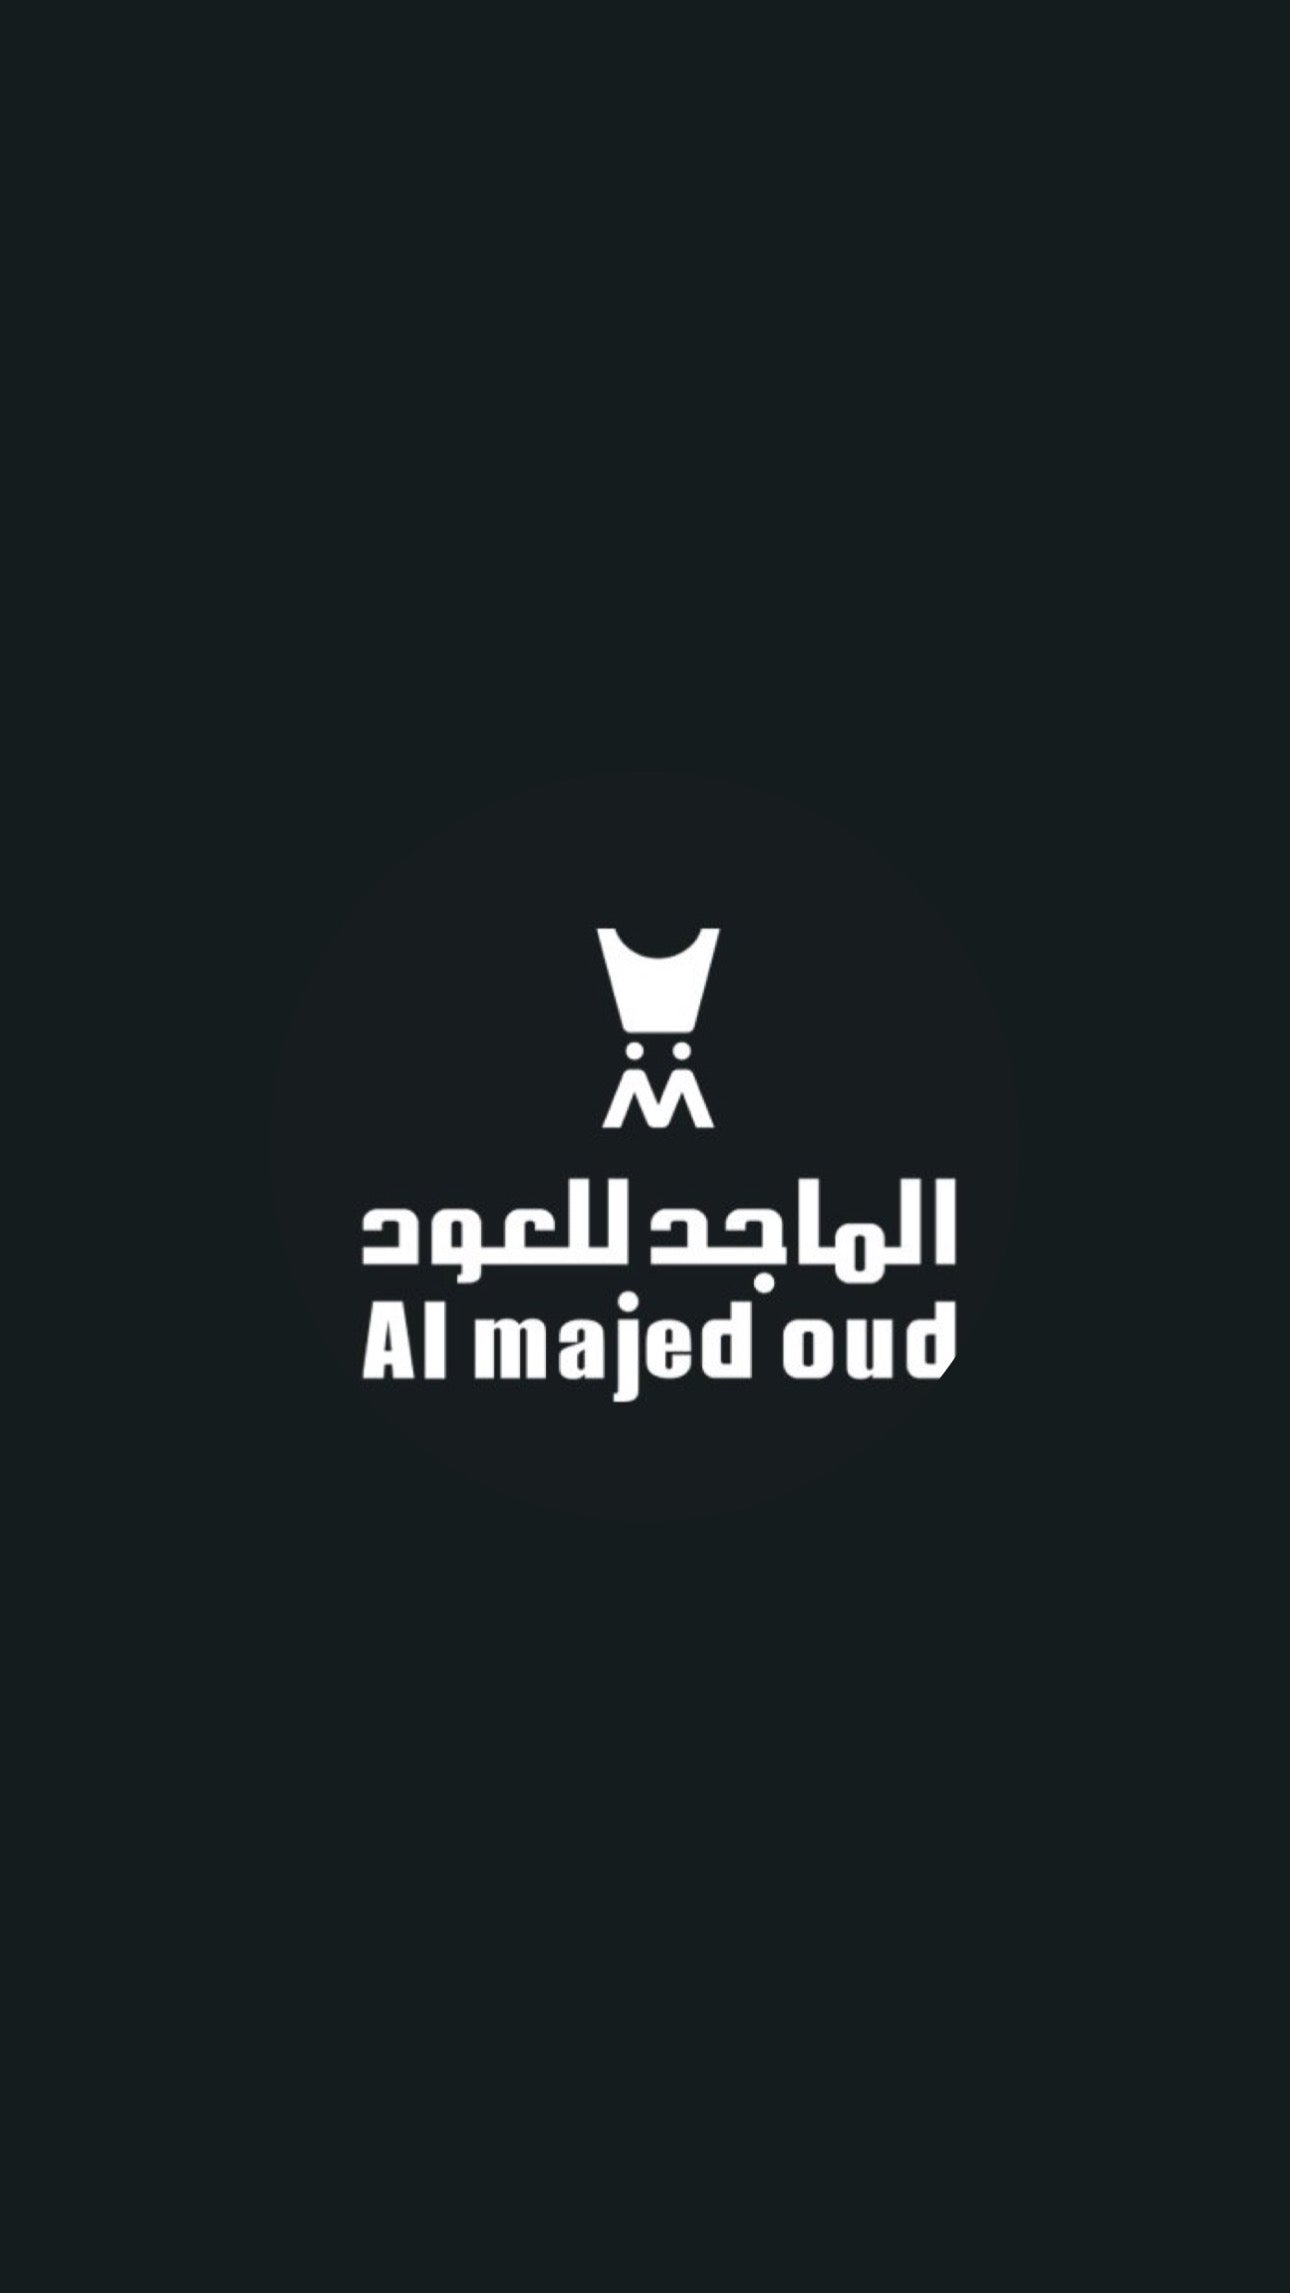 Almajed oud